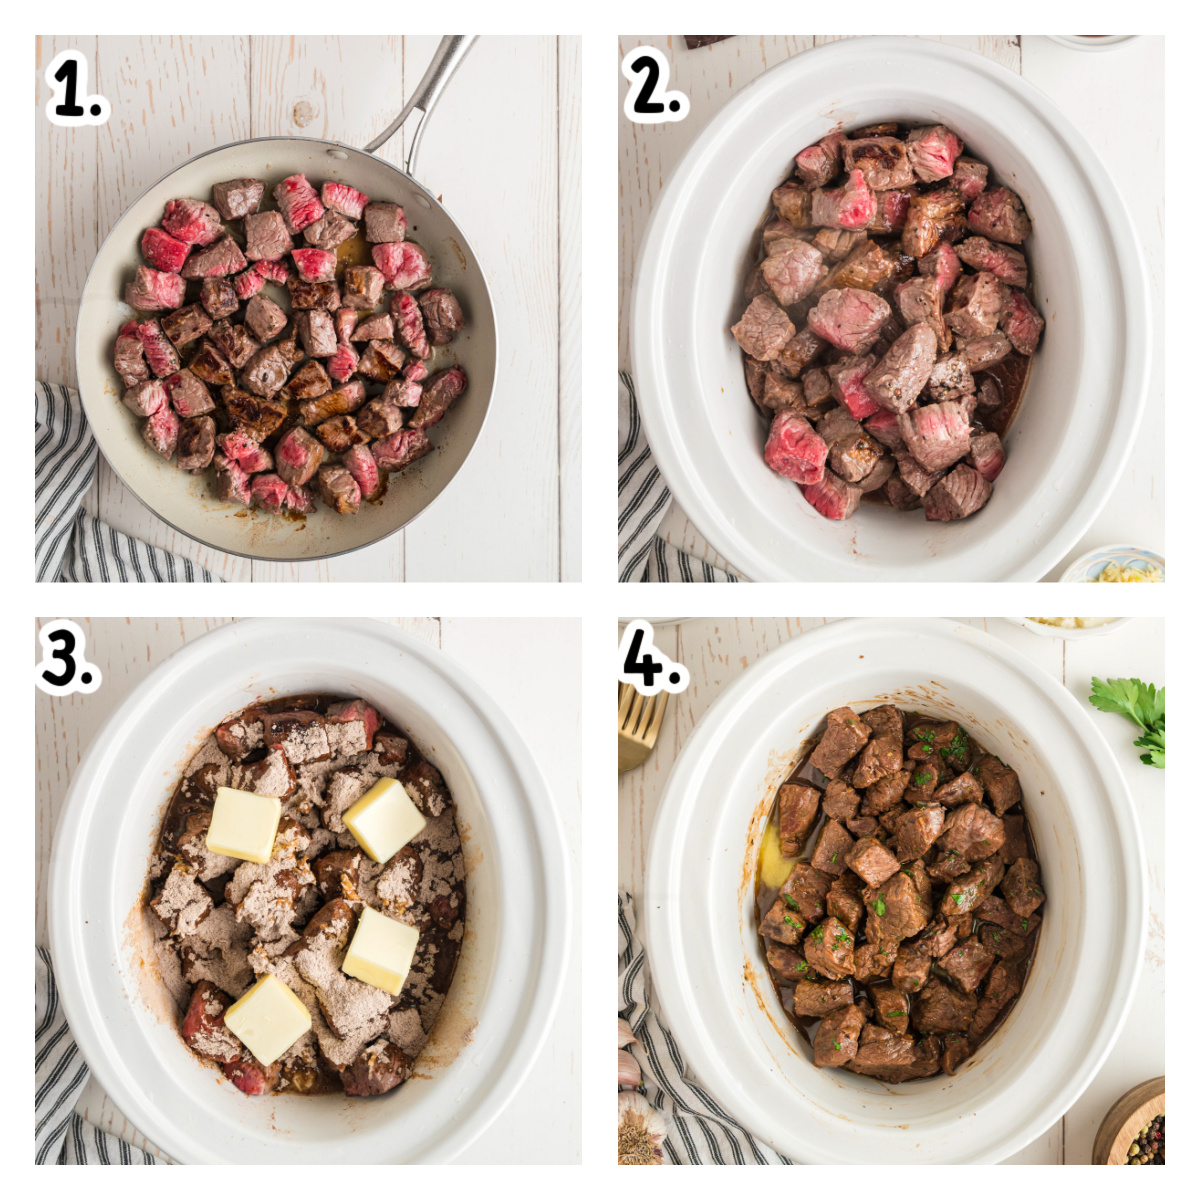 Four images showing how to make beef steak bites in a slow cooker.